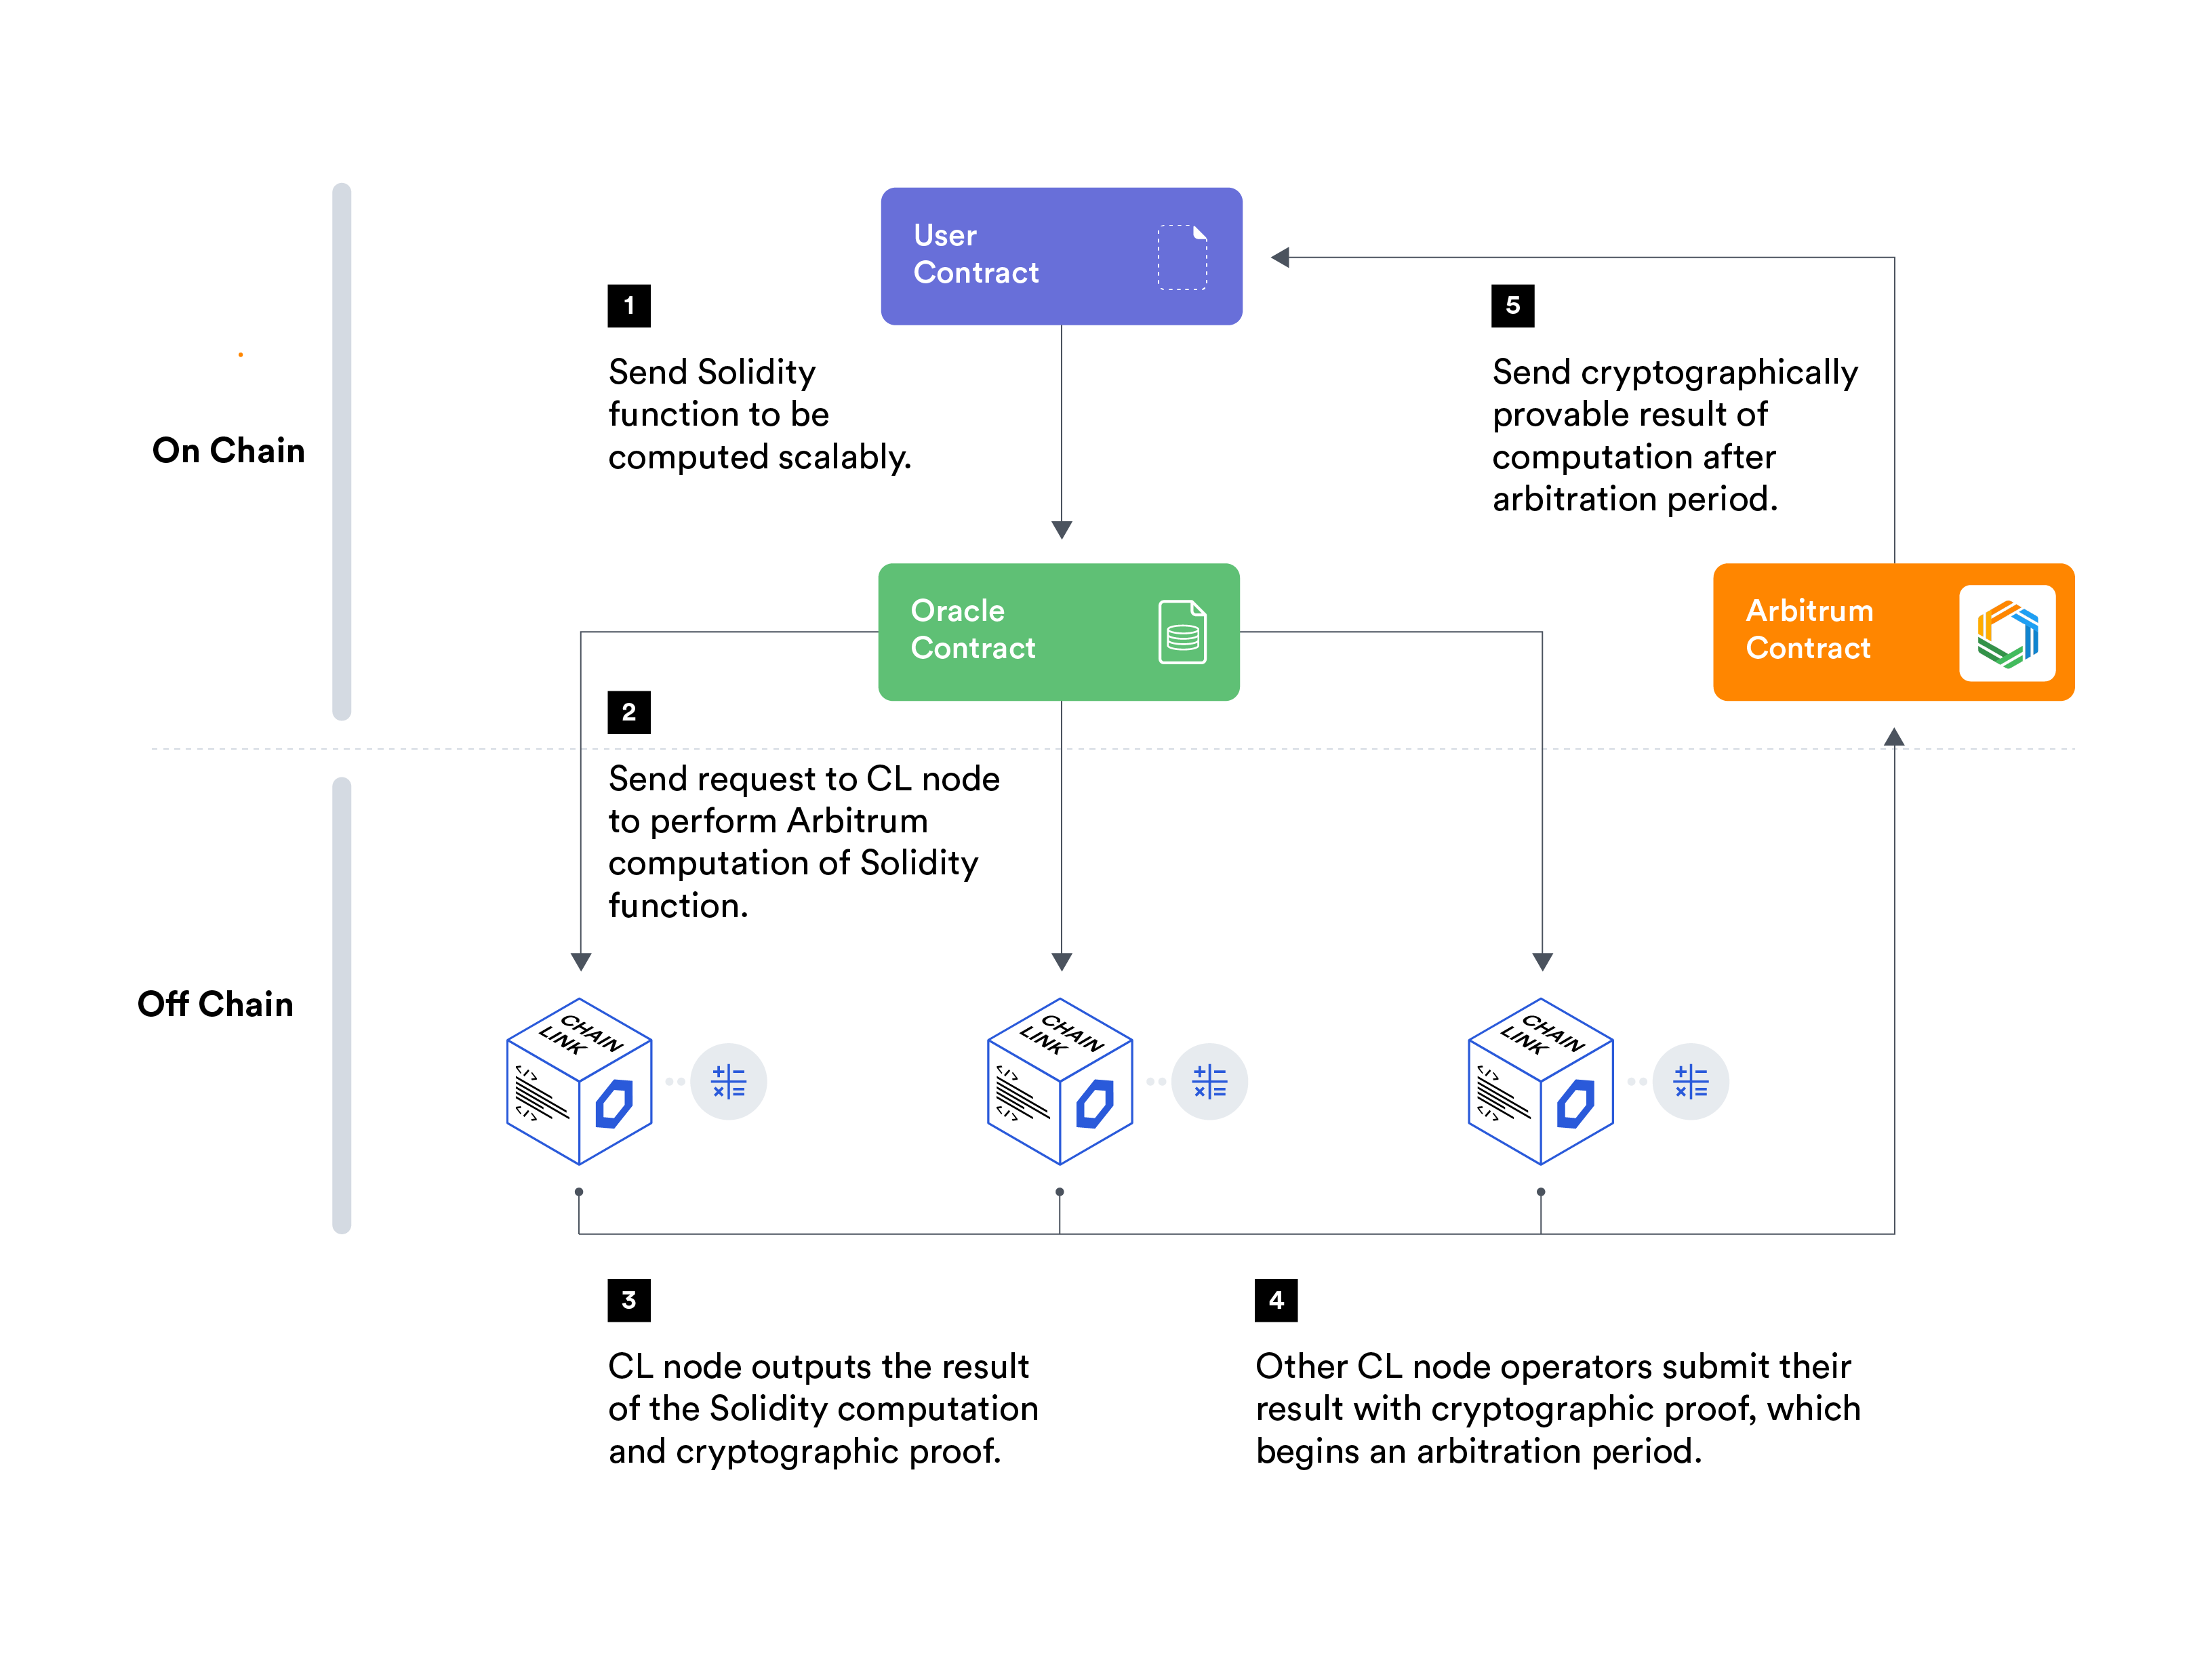 The basic architecture for using Chainlink with Arbitrum